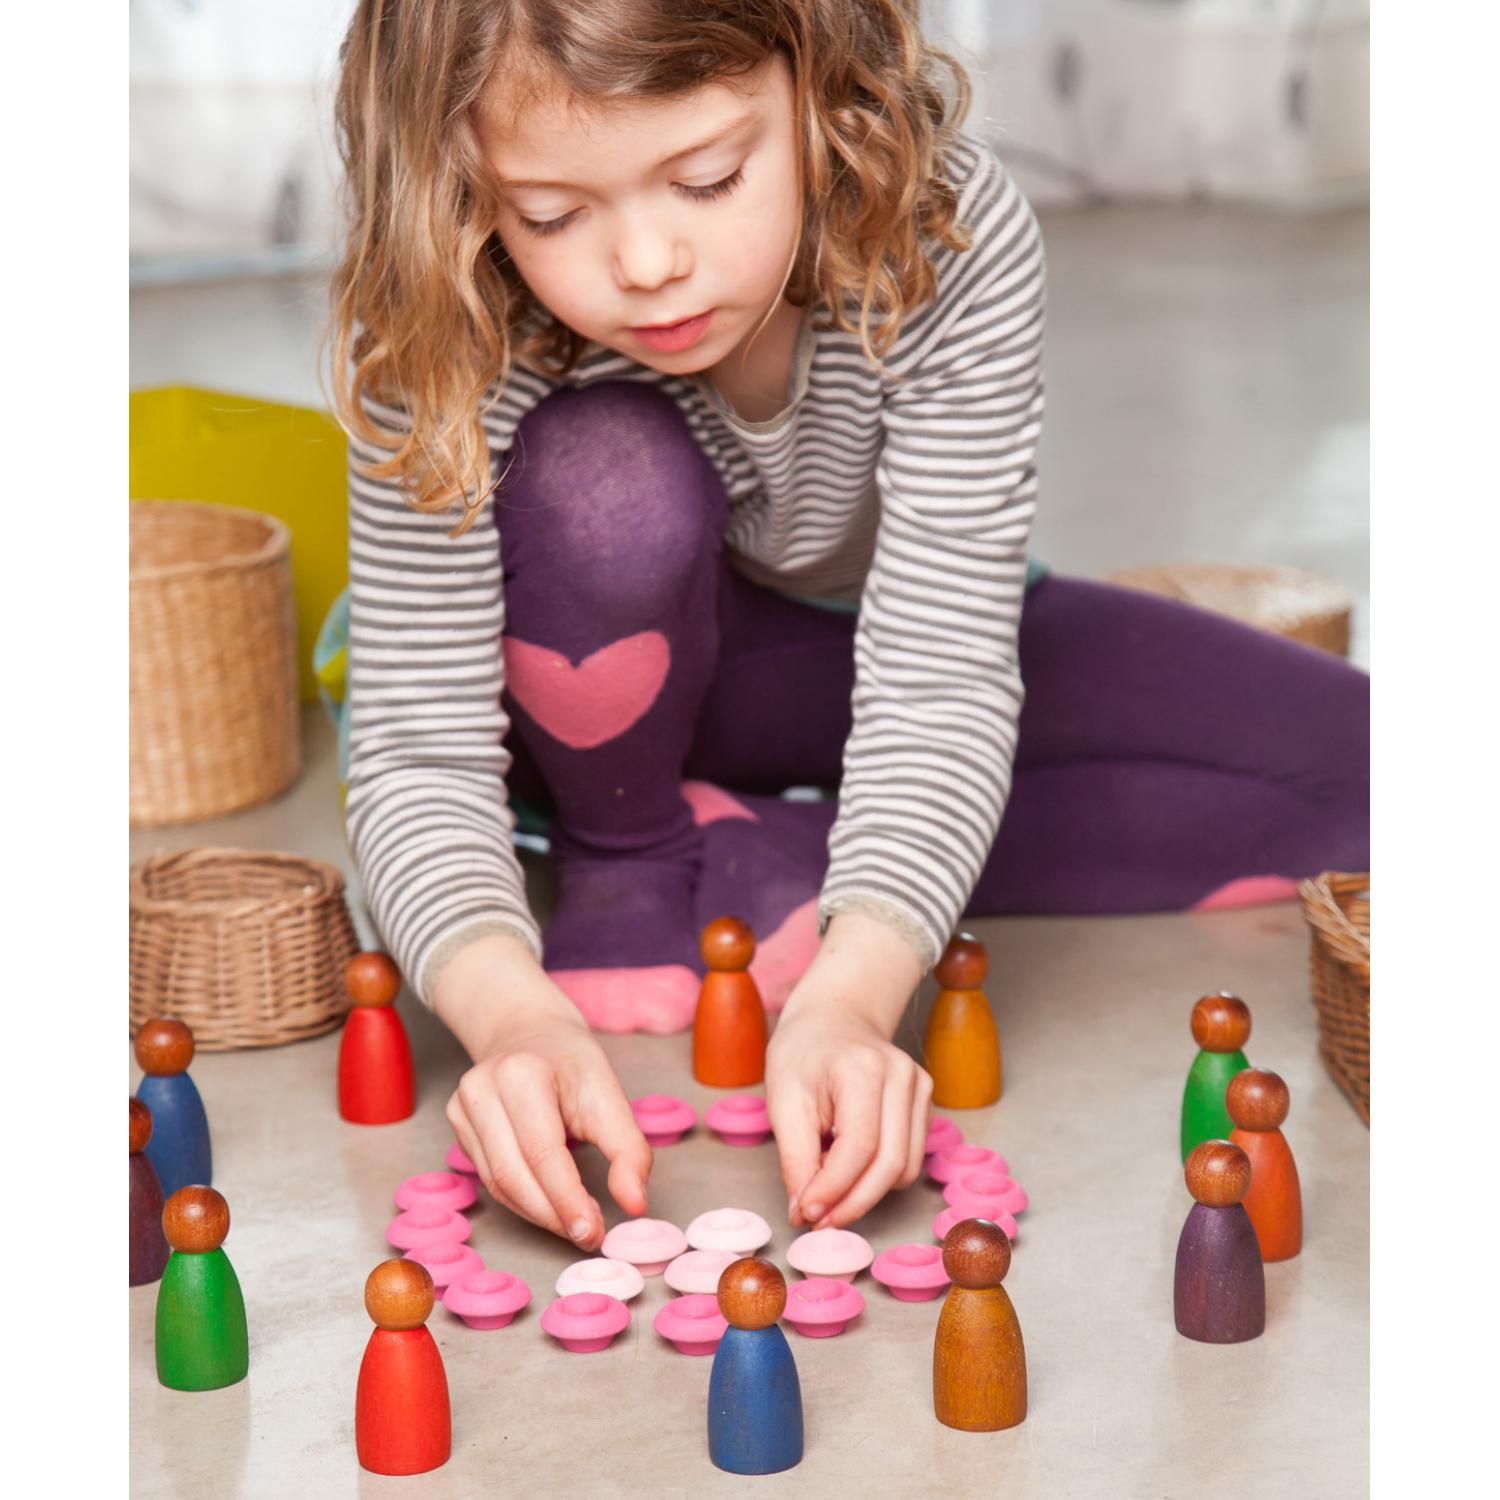 Grapat 3 Dark Wood Nins Stained In Cold Colours | Wooden Toys for Kids | Open-Ended Play Set | Lifestyle: Girl Playing with Dark Wood Nins on Floor | BeoVERDE.ie